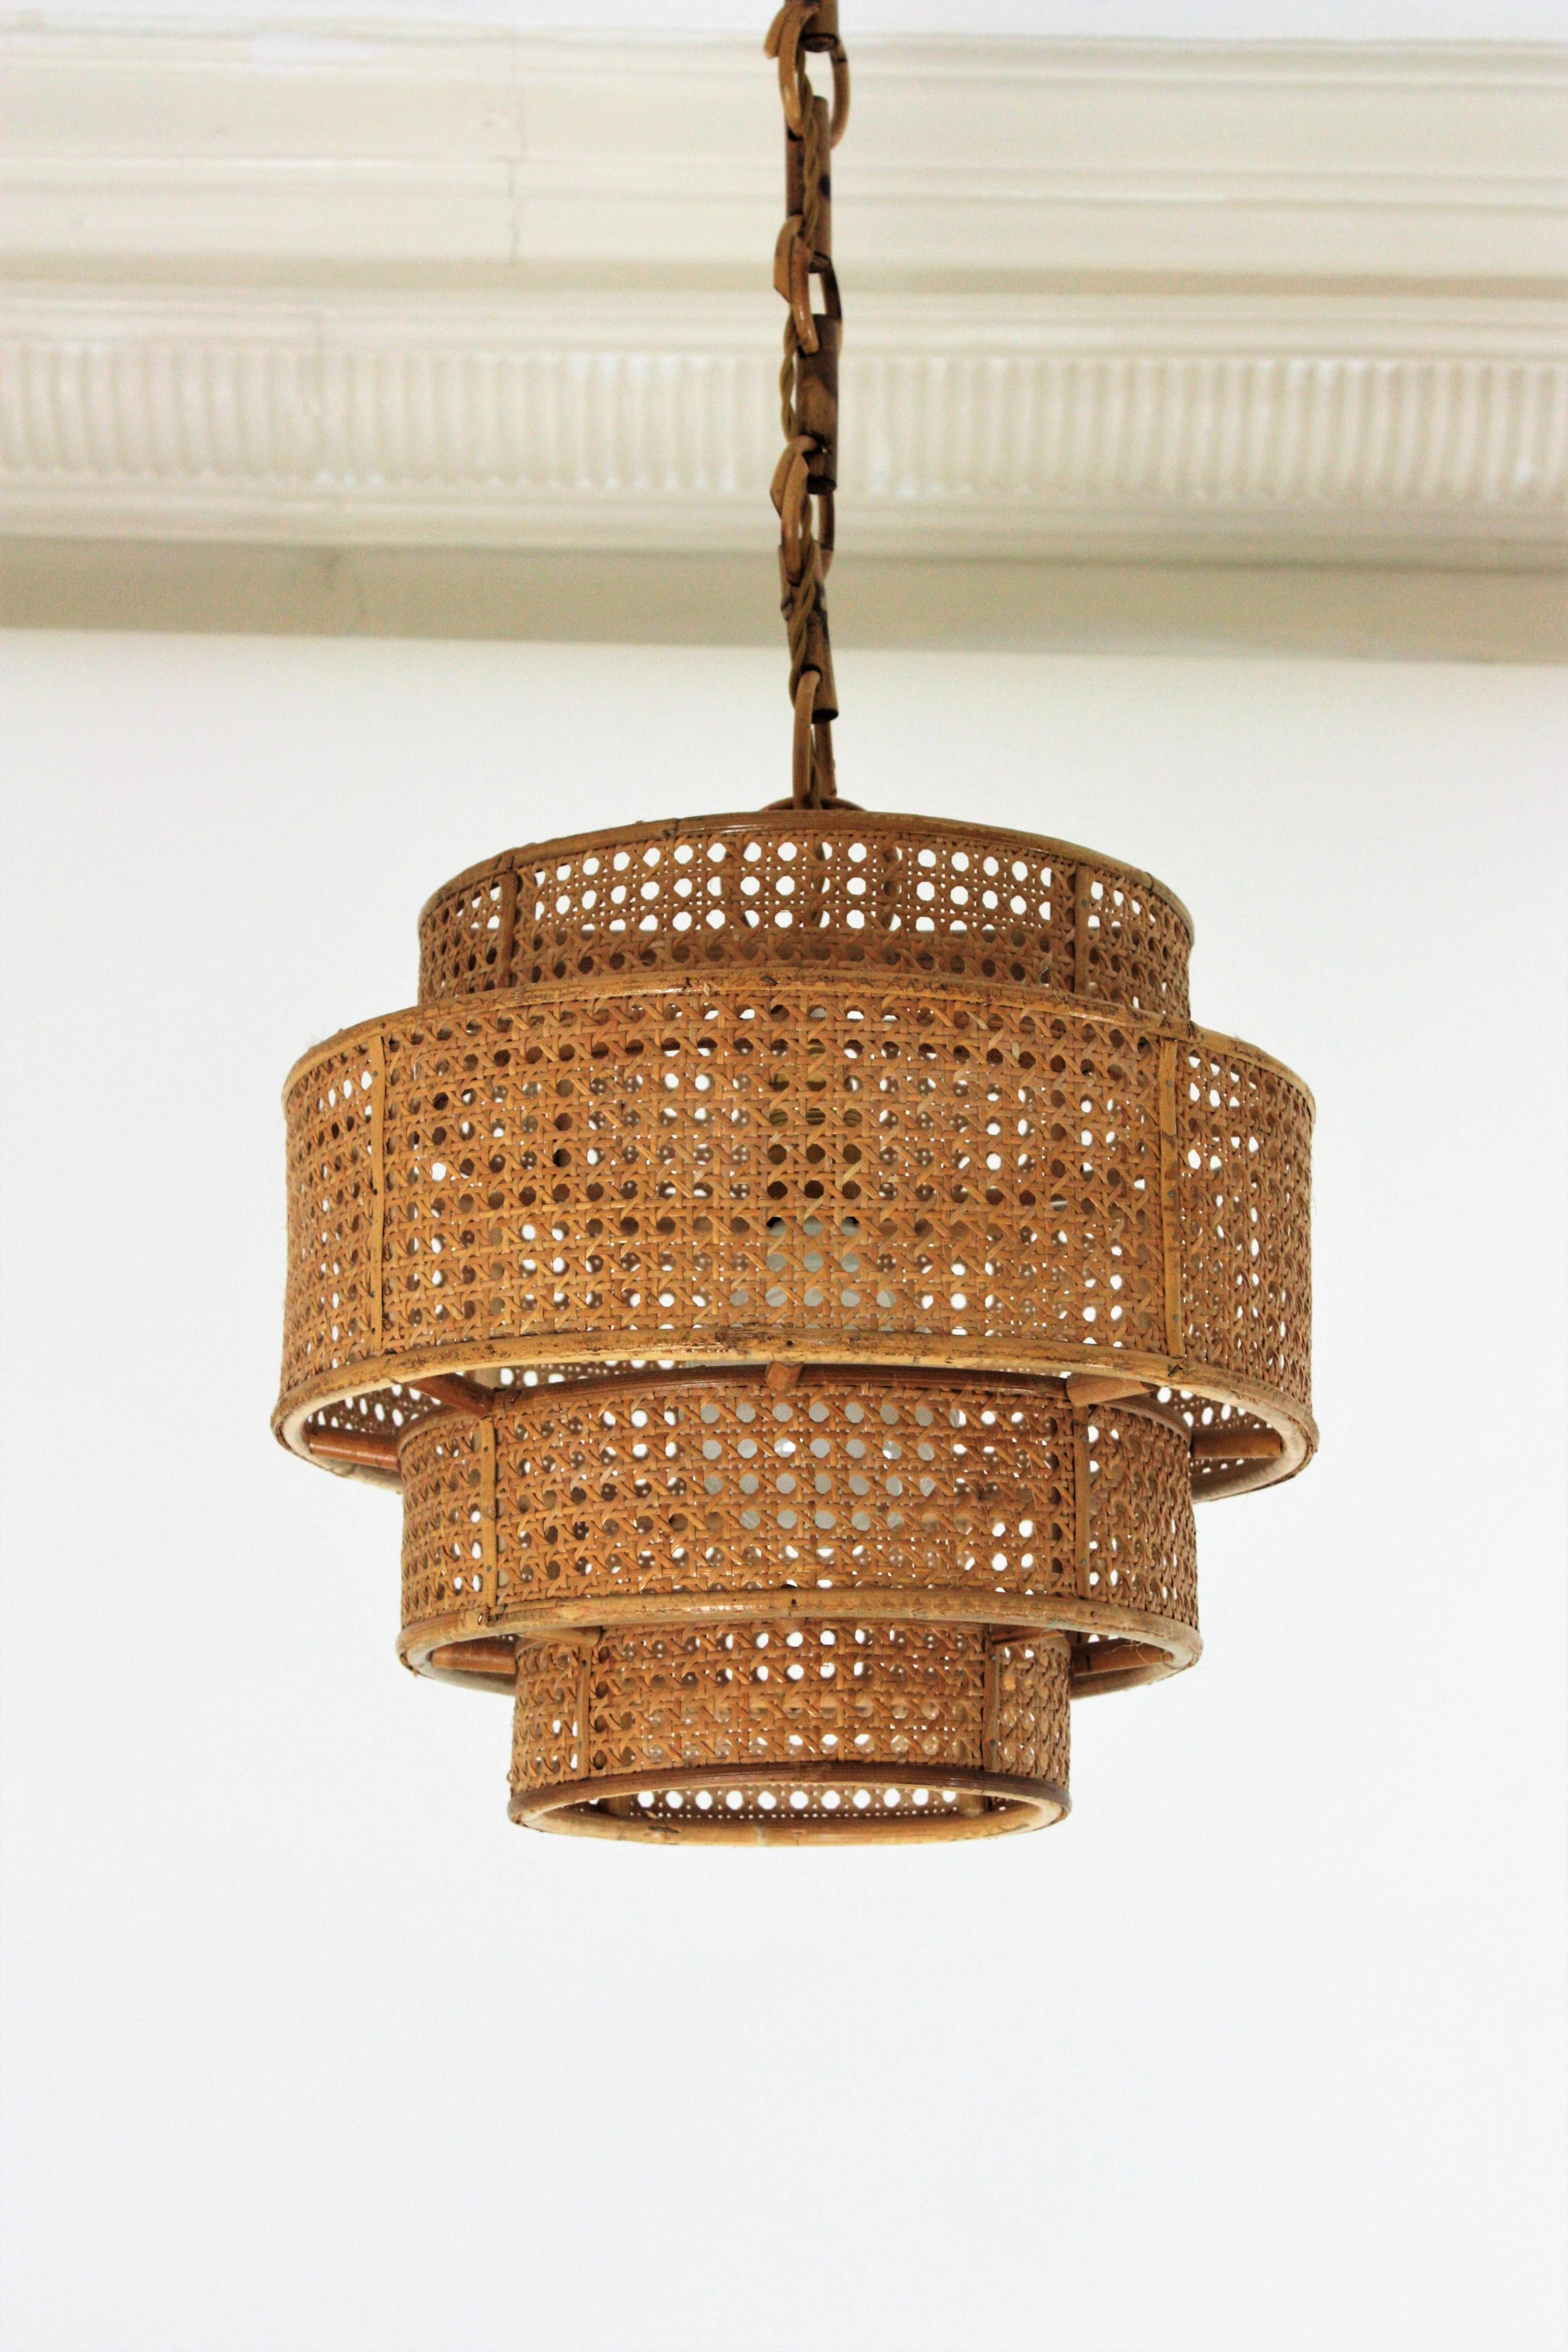 20th Century  Rattan Wicker Weave Concentric Cylinder Pendant Hanging Light, 1960s For Sale